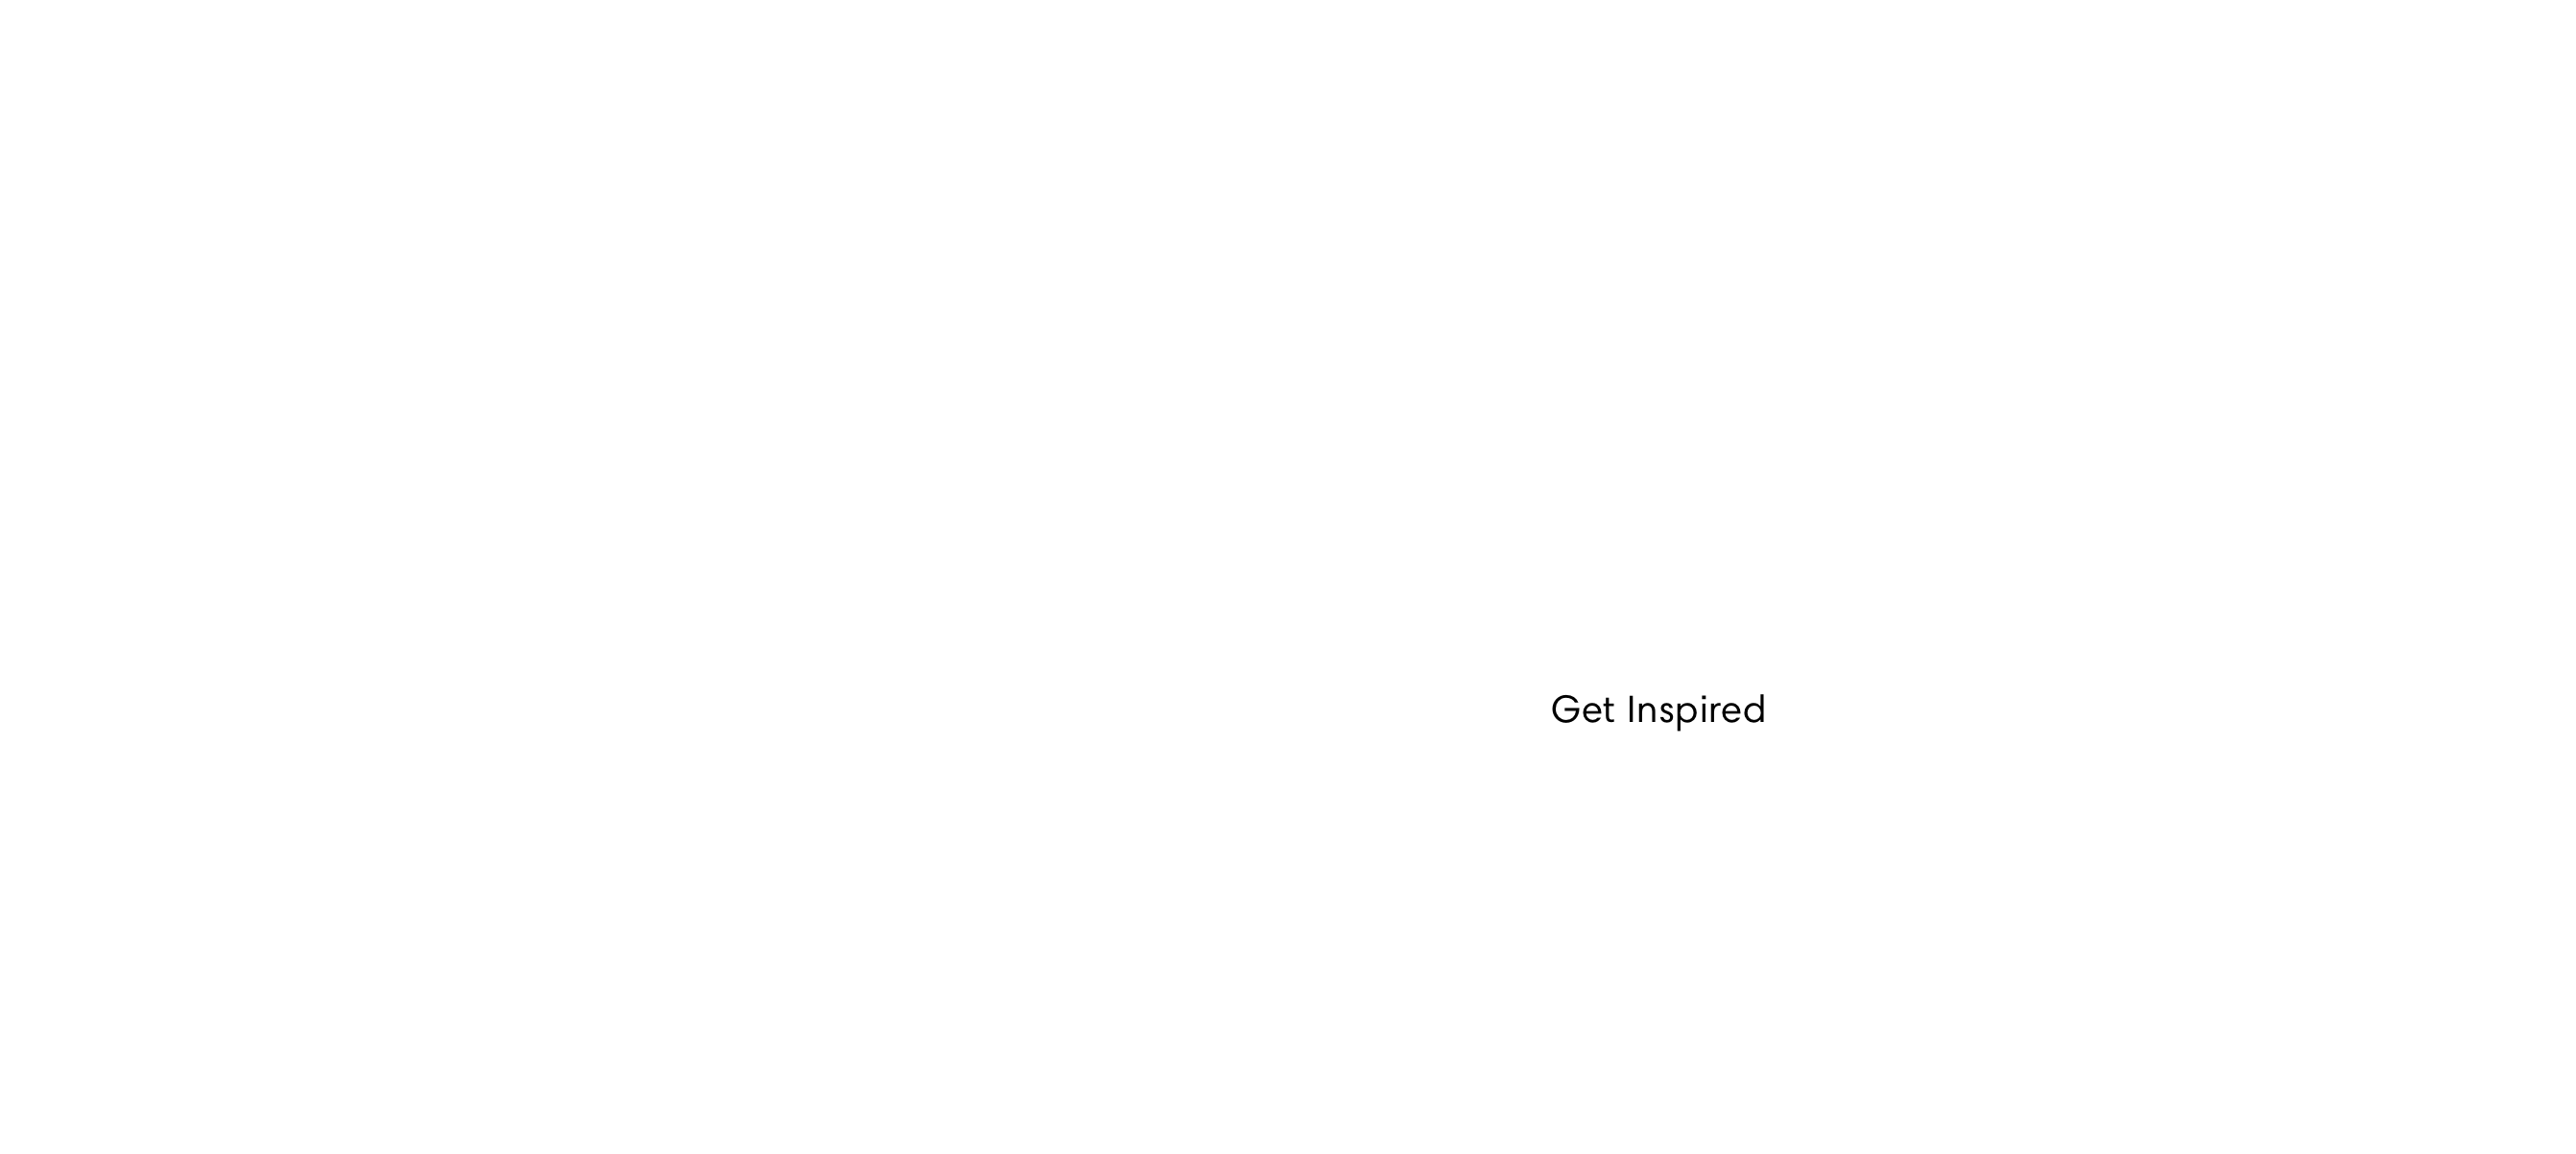 The Fall Lookbook. Get Inspired.